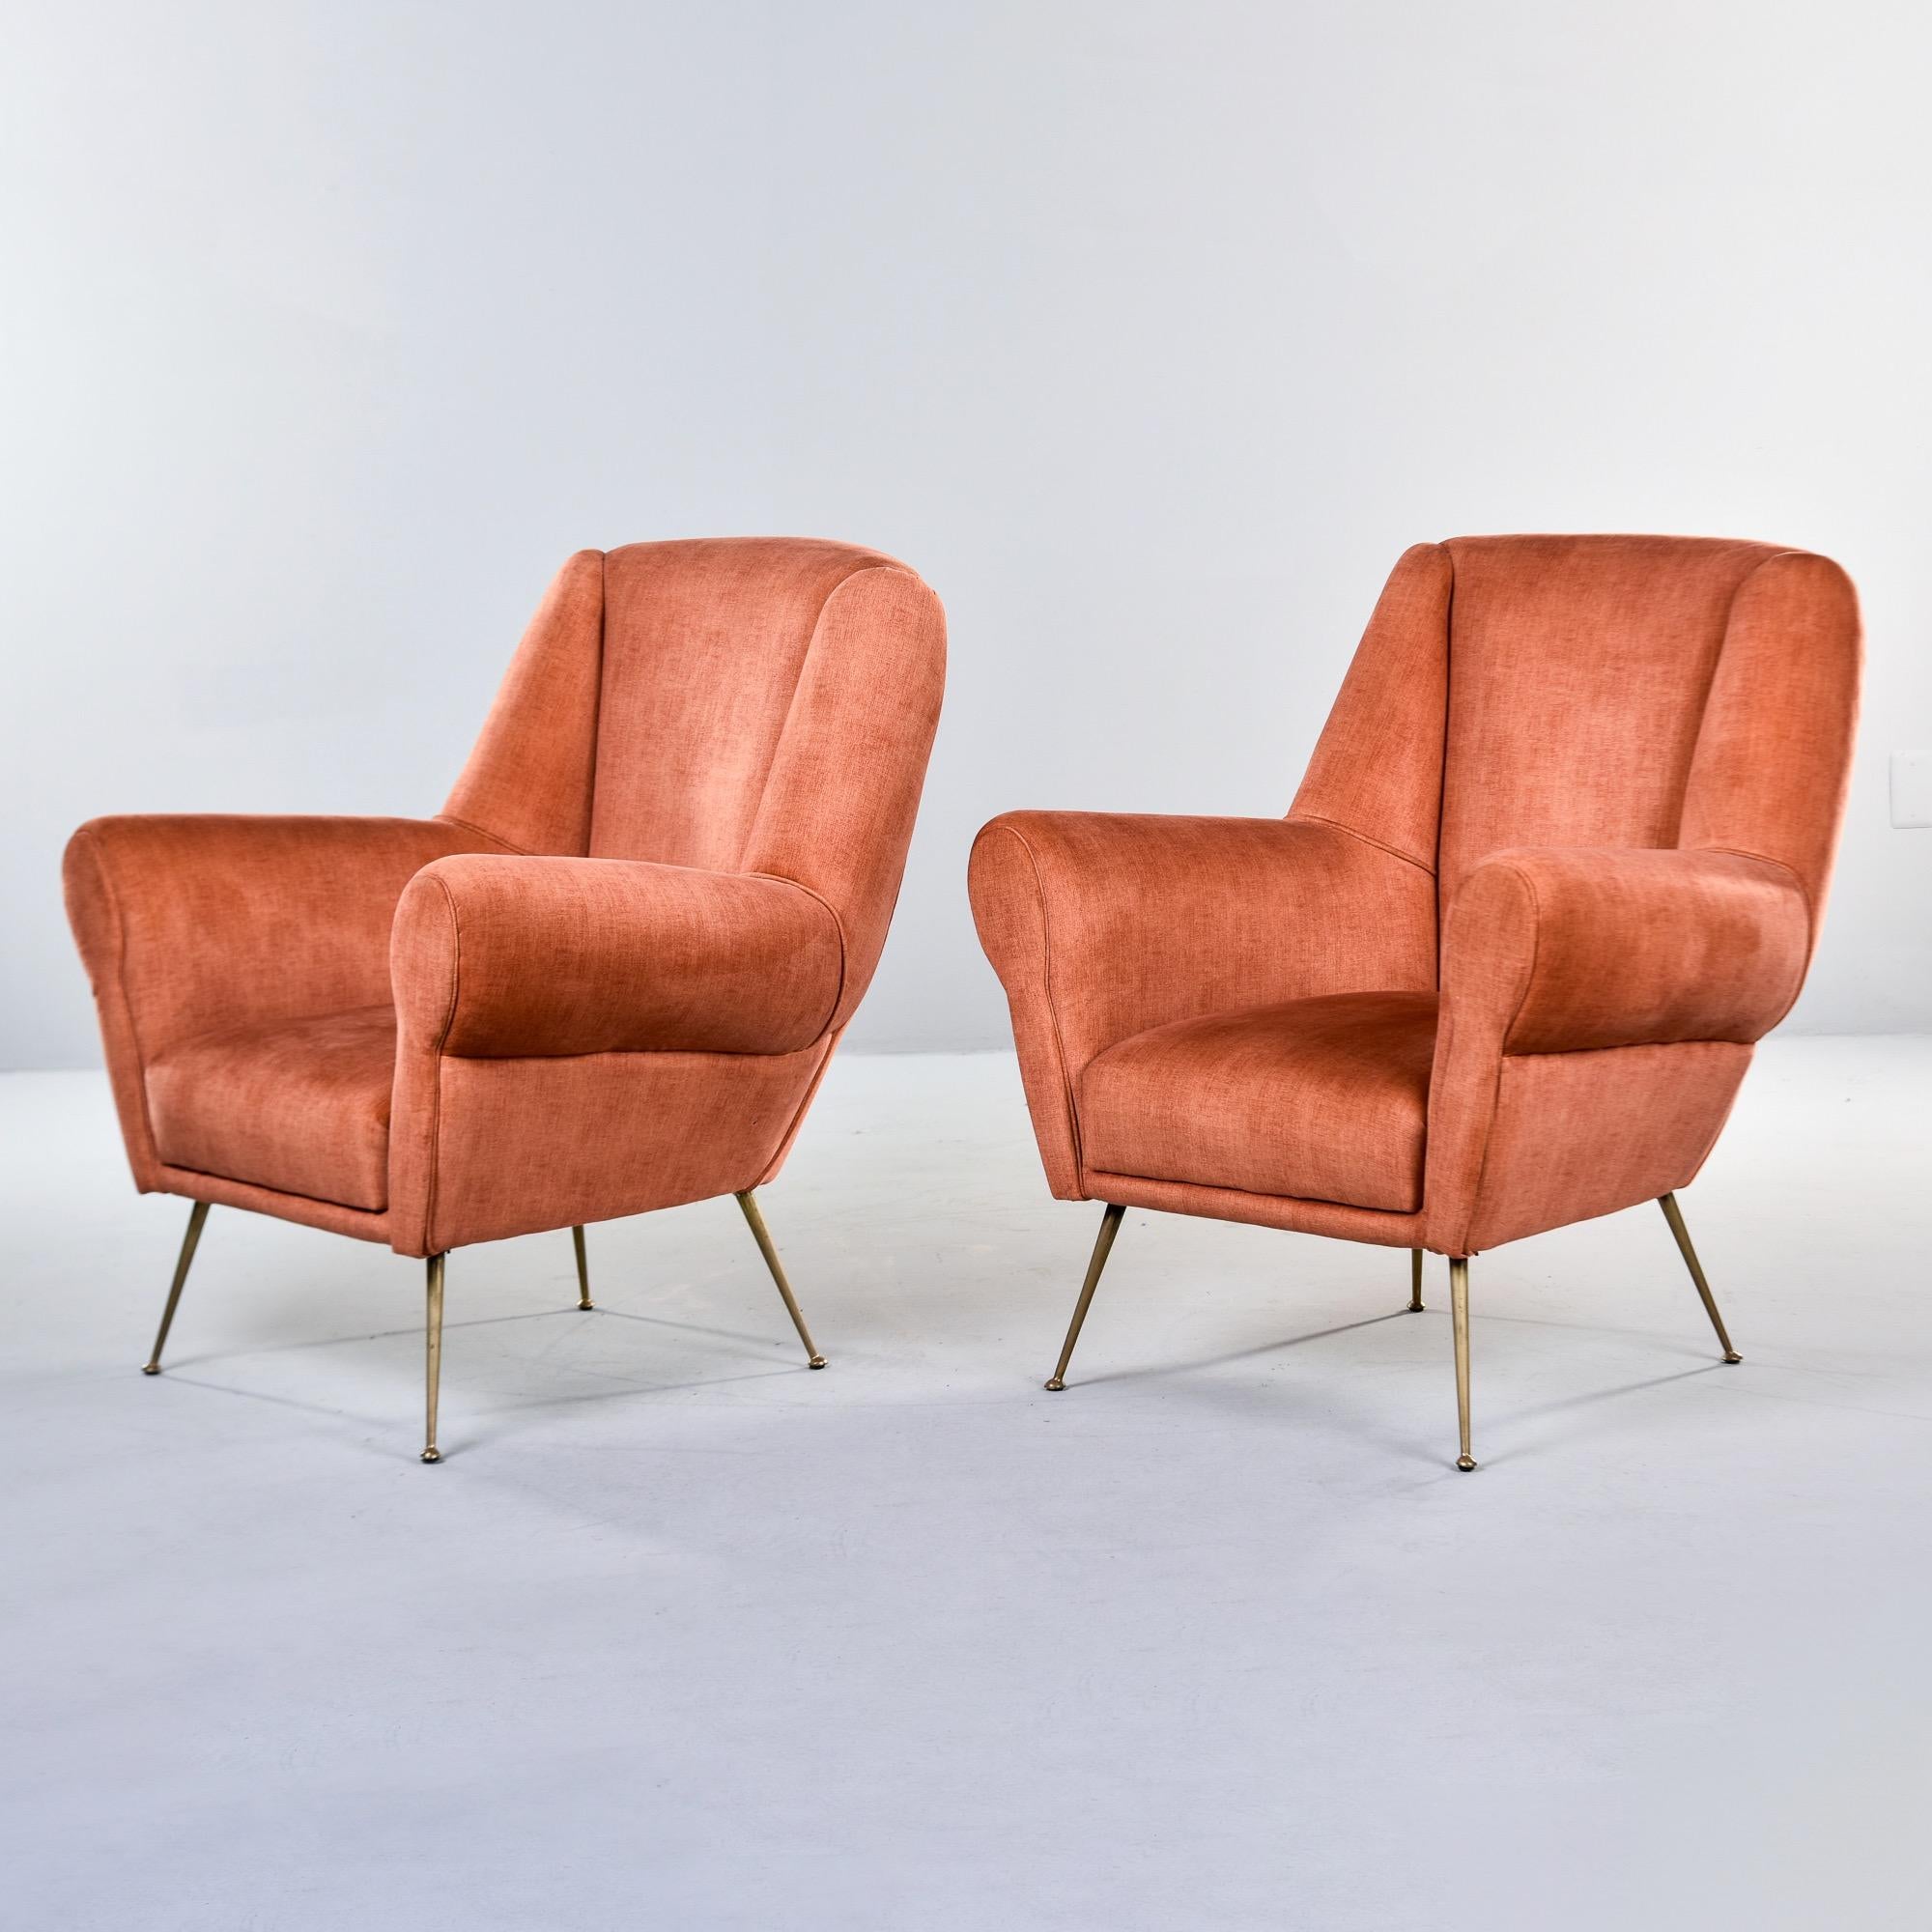 Found in Italy, this pair of upholstered lounge chairs dates from the 1950s. These chairs feature new upholstery in a dark apricot chenille velvet, high backrests, rolled arms and slender brass legs and feet. Unknown Italian maker. Sold and priced